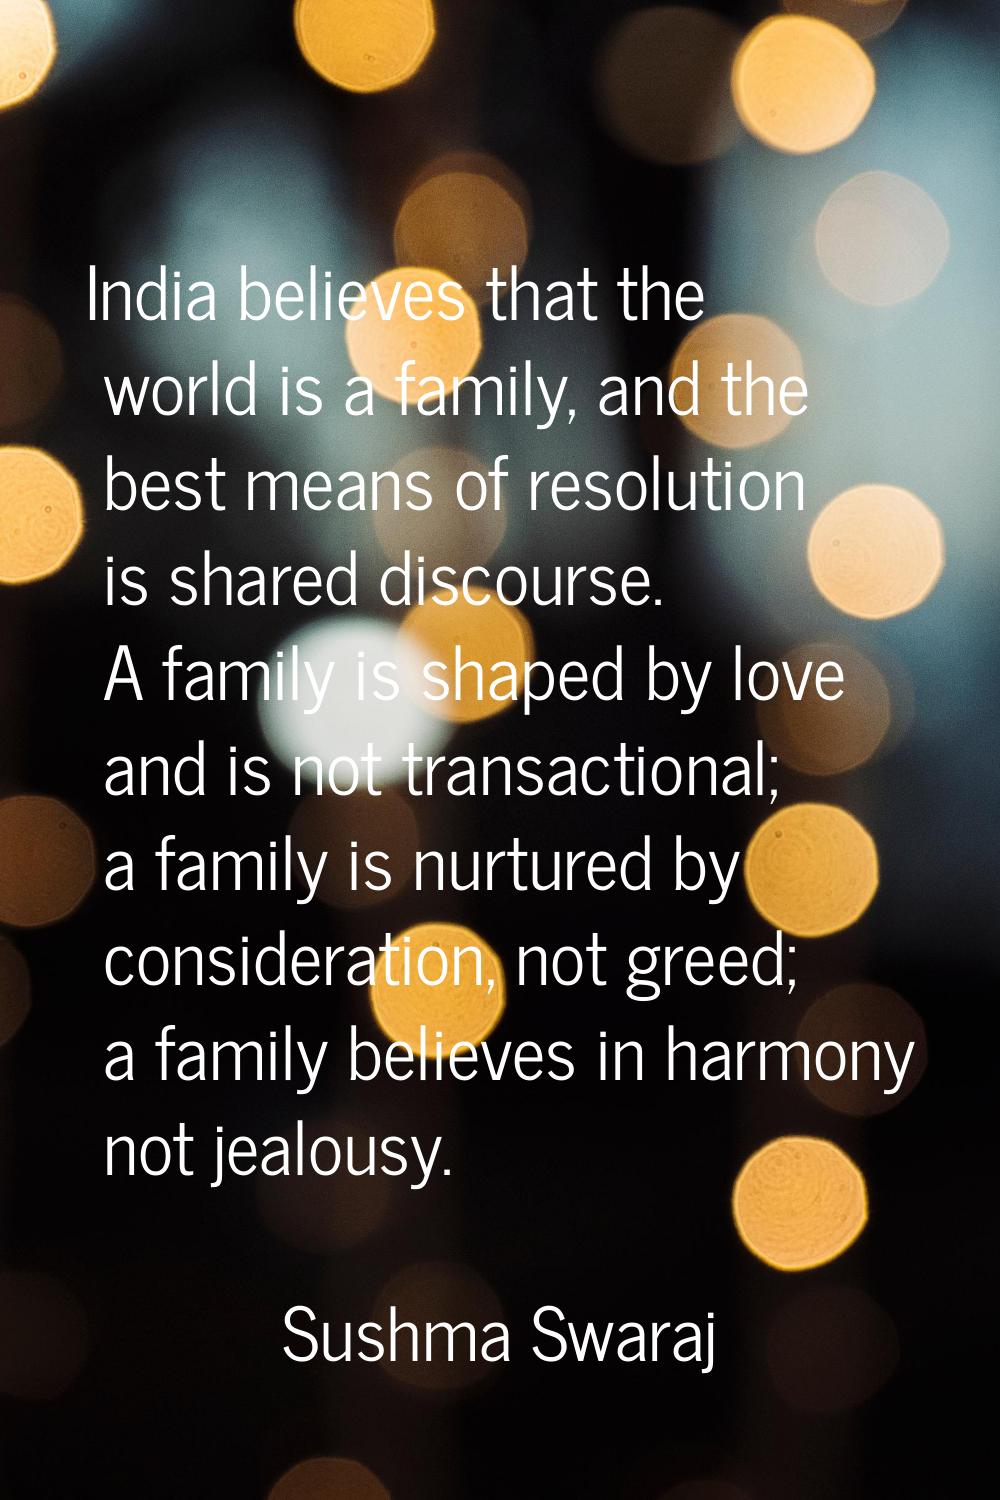 India believes that the world is a family, and the best means of resolution is shared discourse. A 